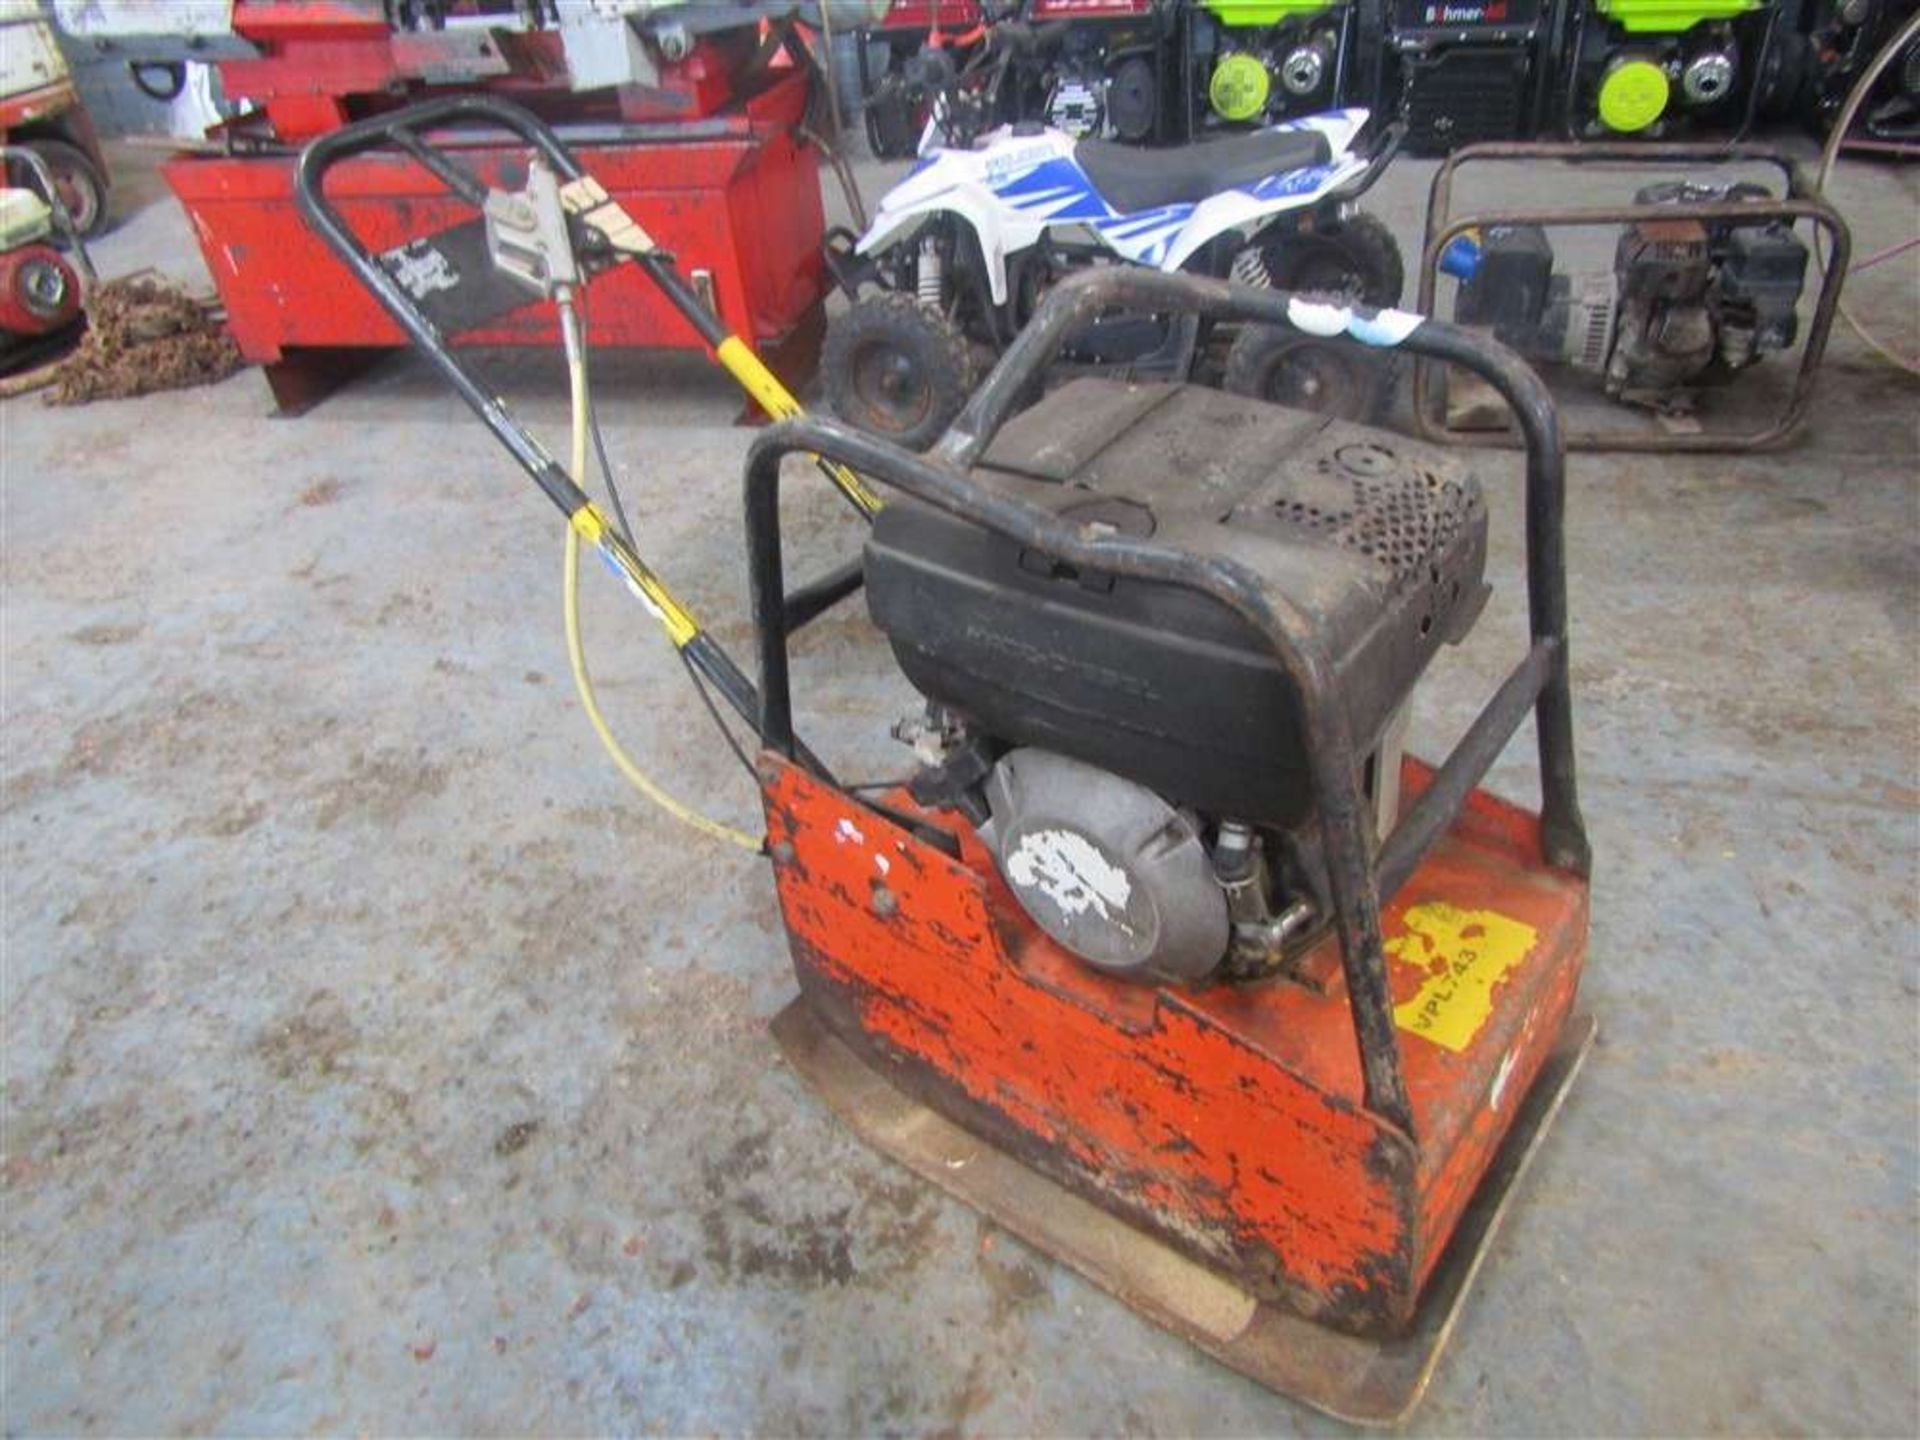 16" Vibrating Plate (Direct Hire Co)